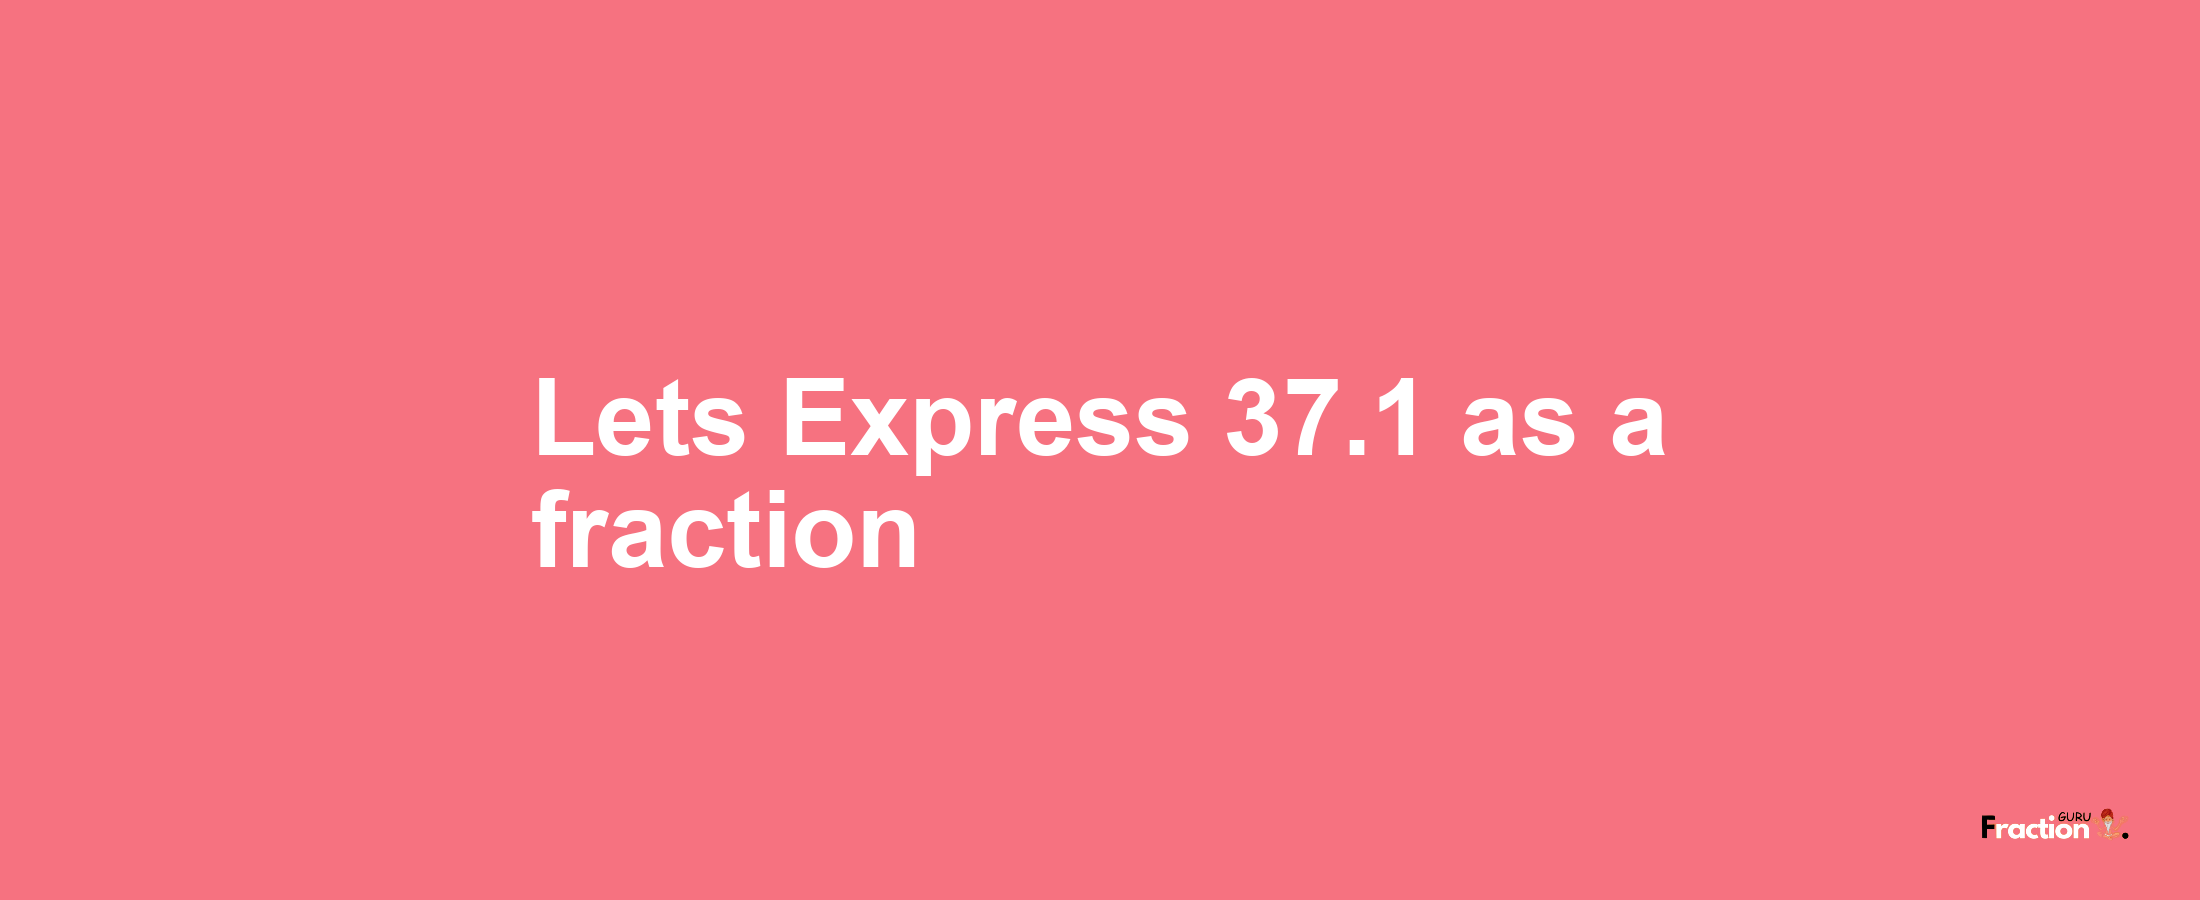 Lets Express 37.1 as afraction